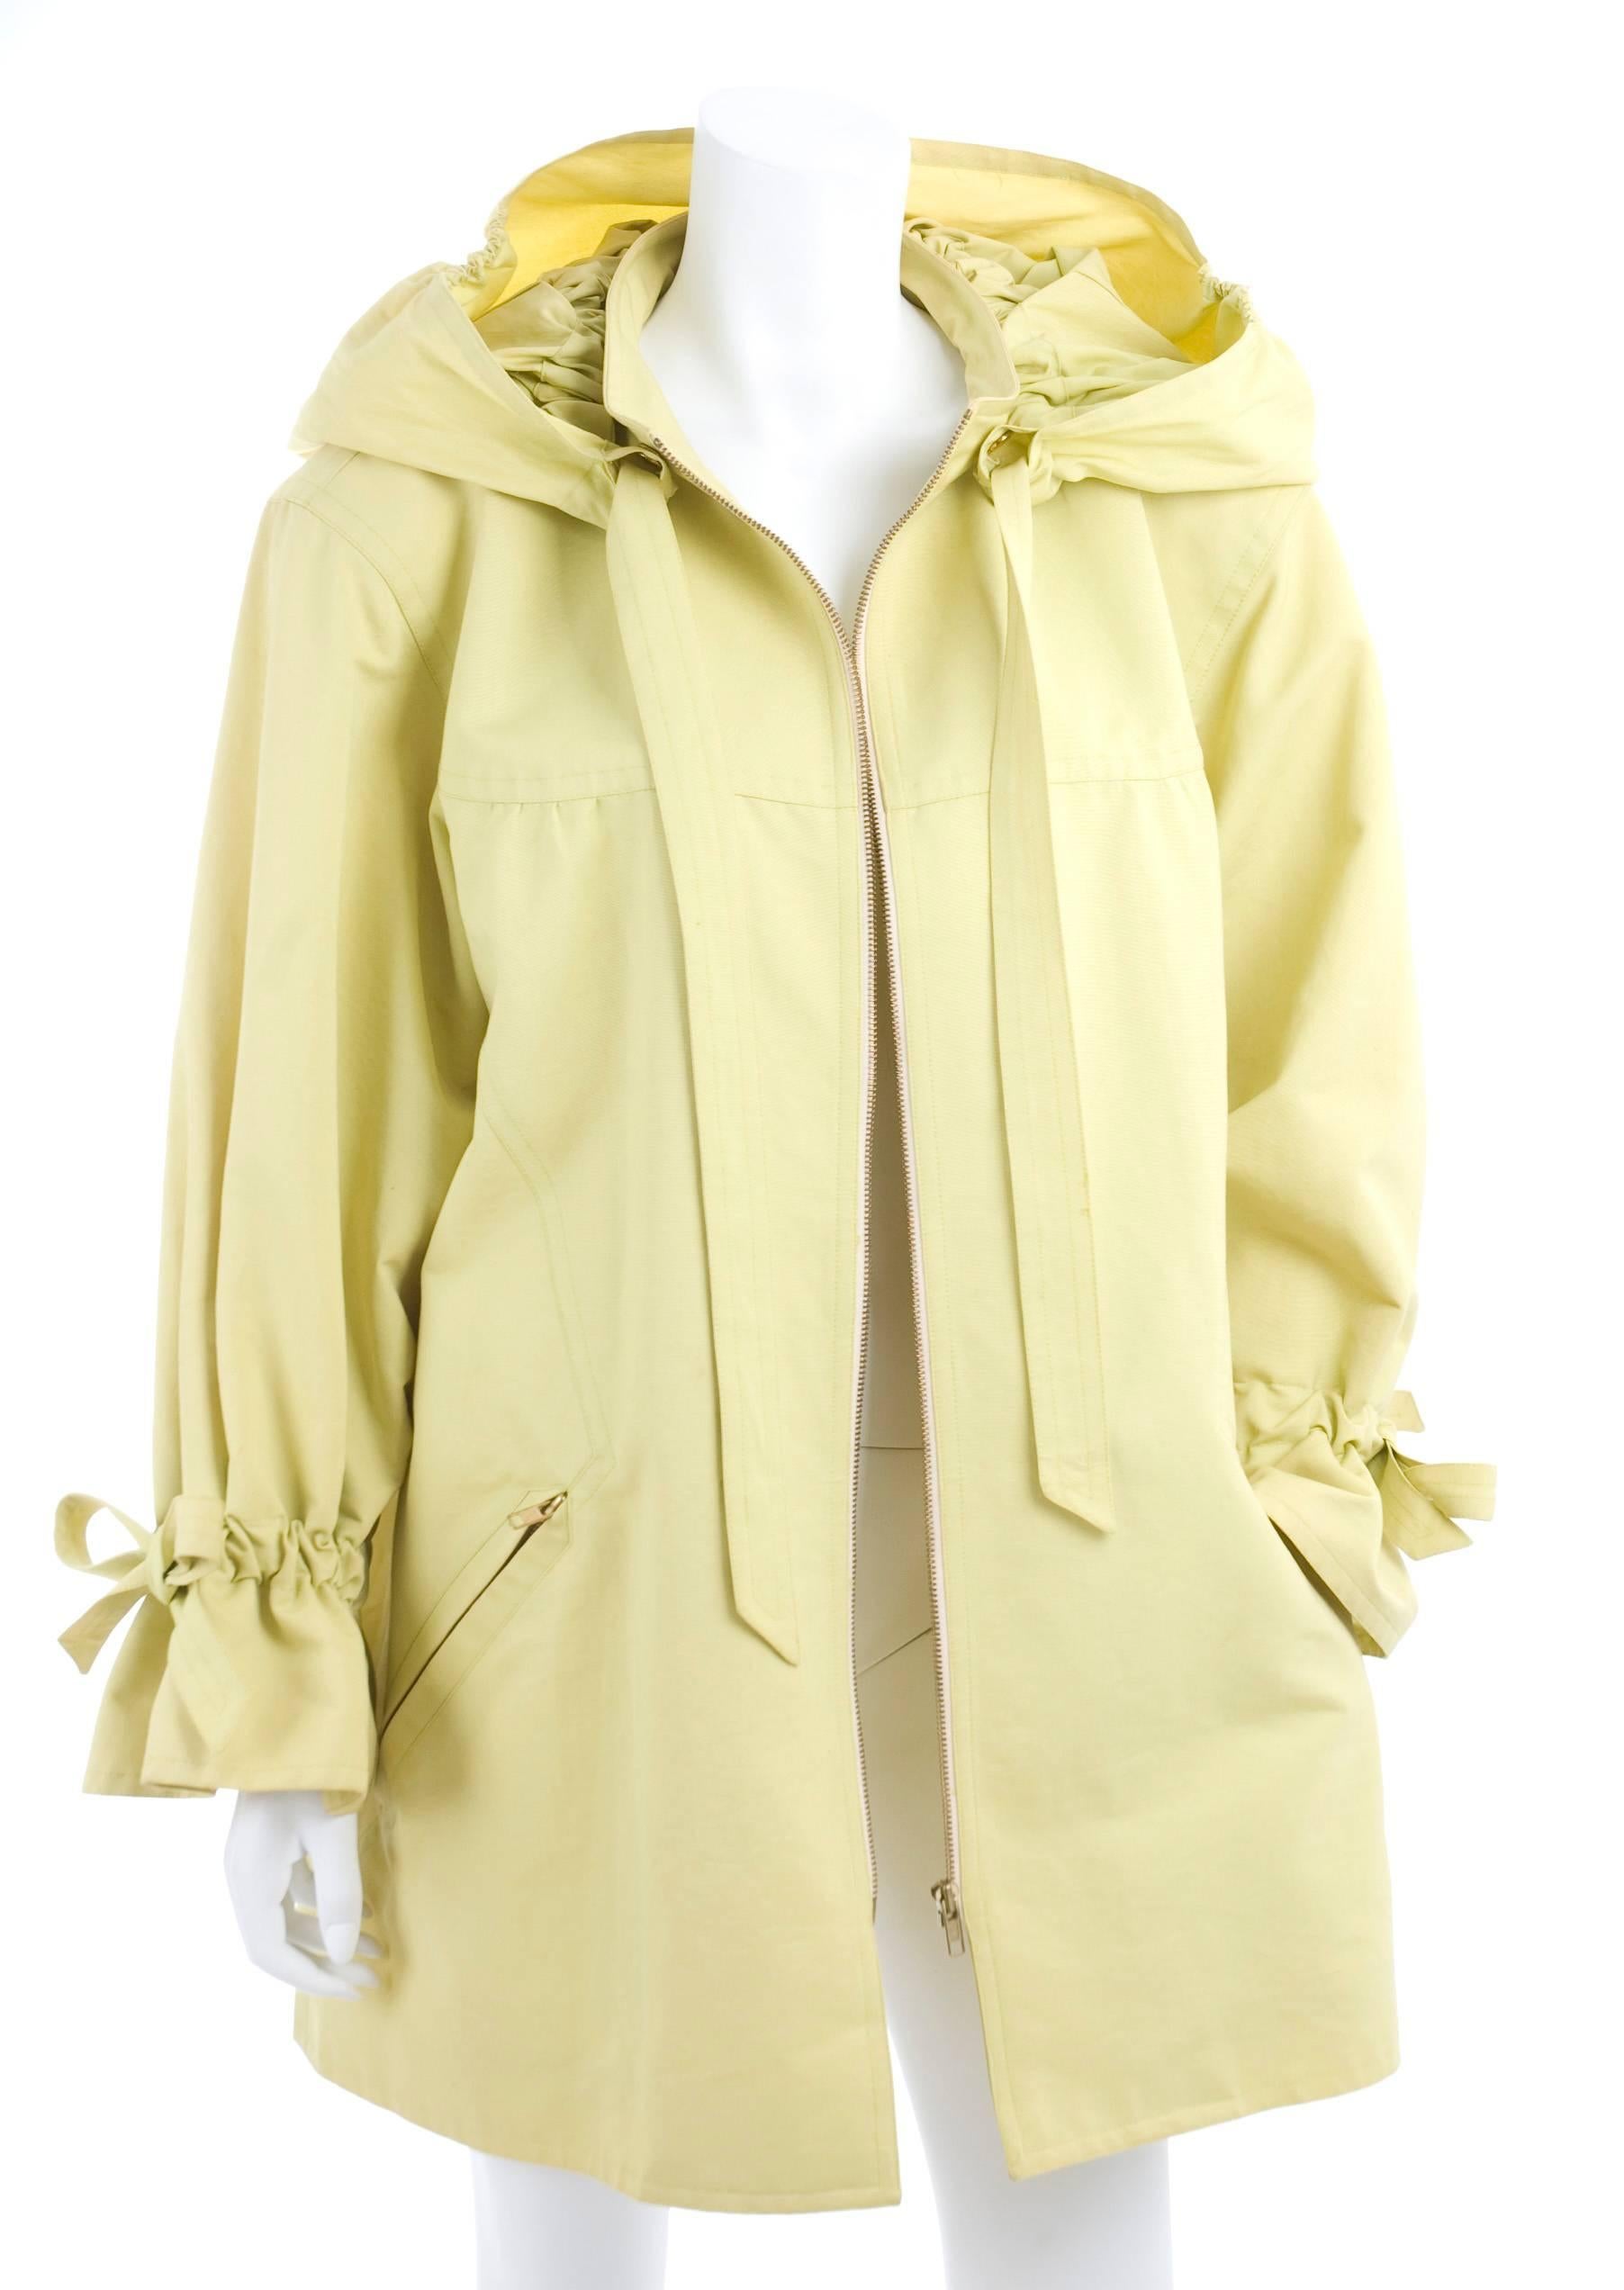 Christian Lacroix Outdoor Jacket or Overcoat in lime green.  
100% Cotton. 
Excellent condition - no flaws to mention. 
Size US 12  
Measurements: 
Length 33